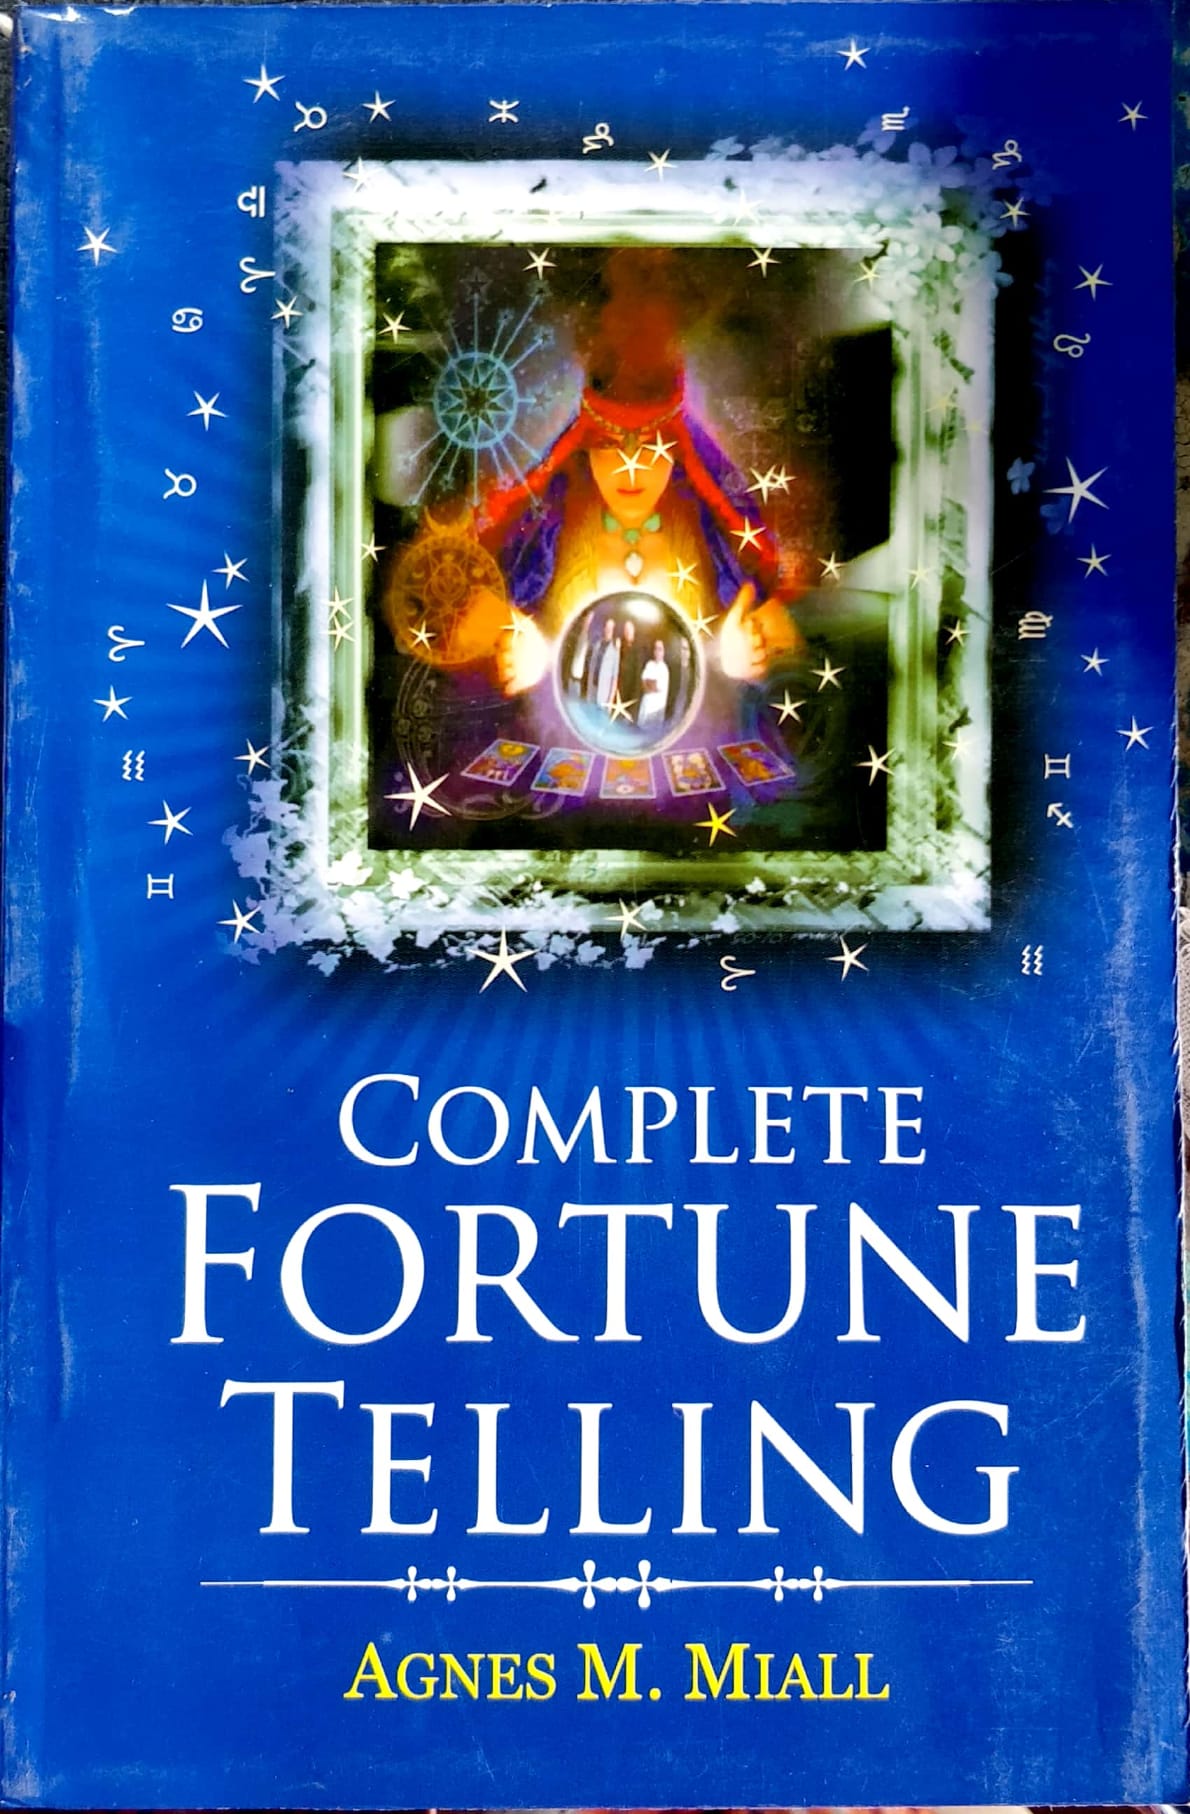 Complete Fortune Telling By Agnes M. Miall in English